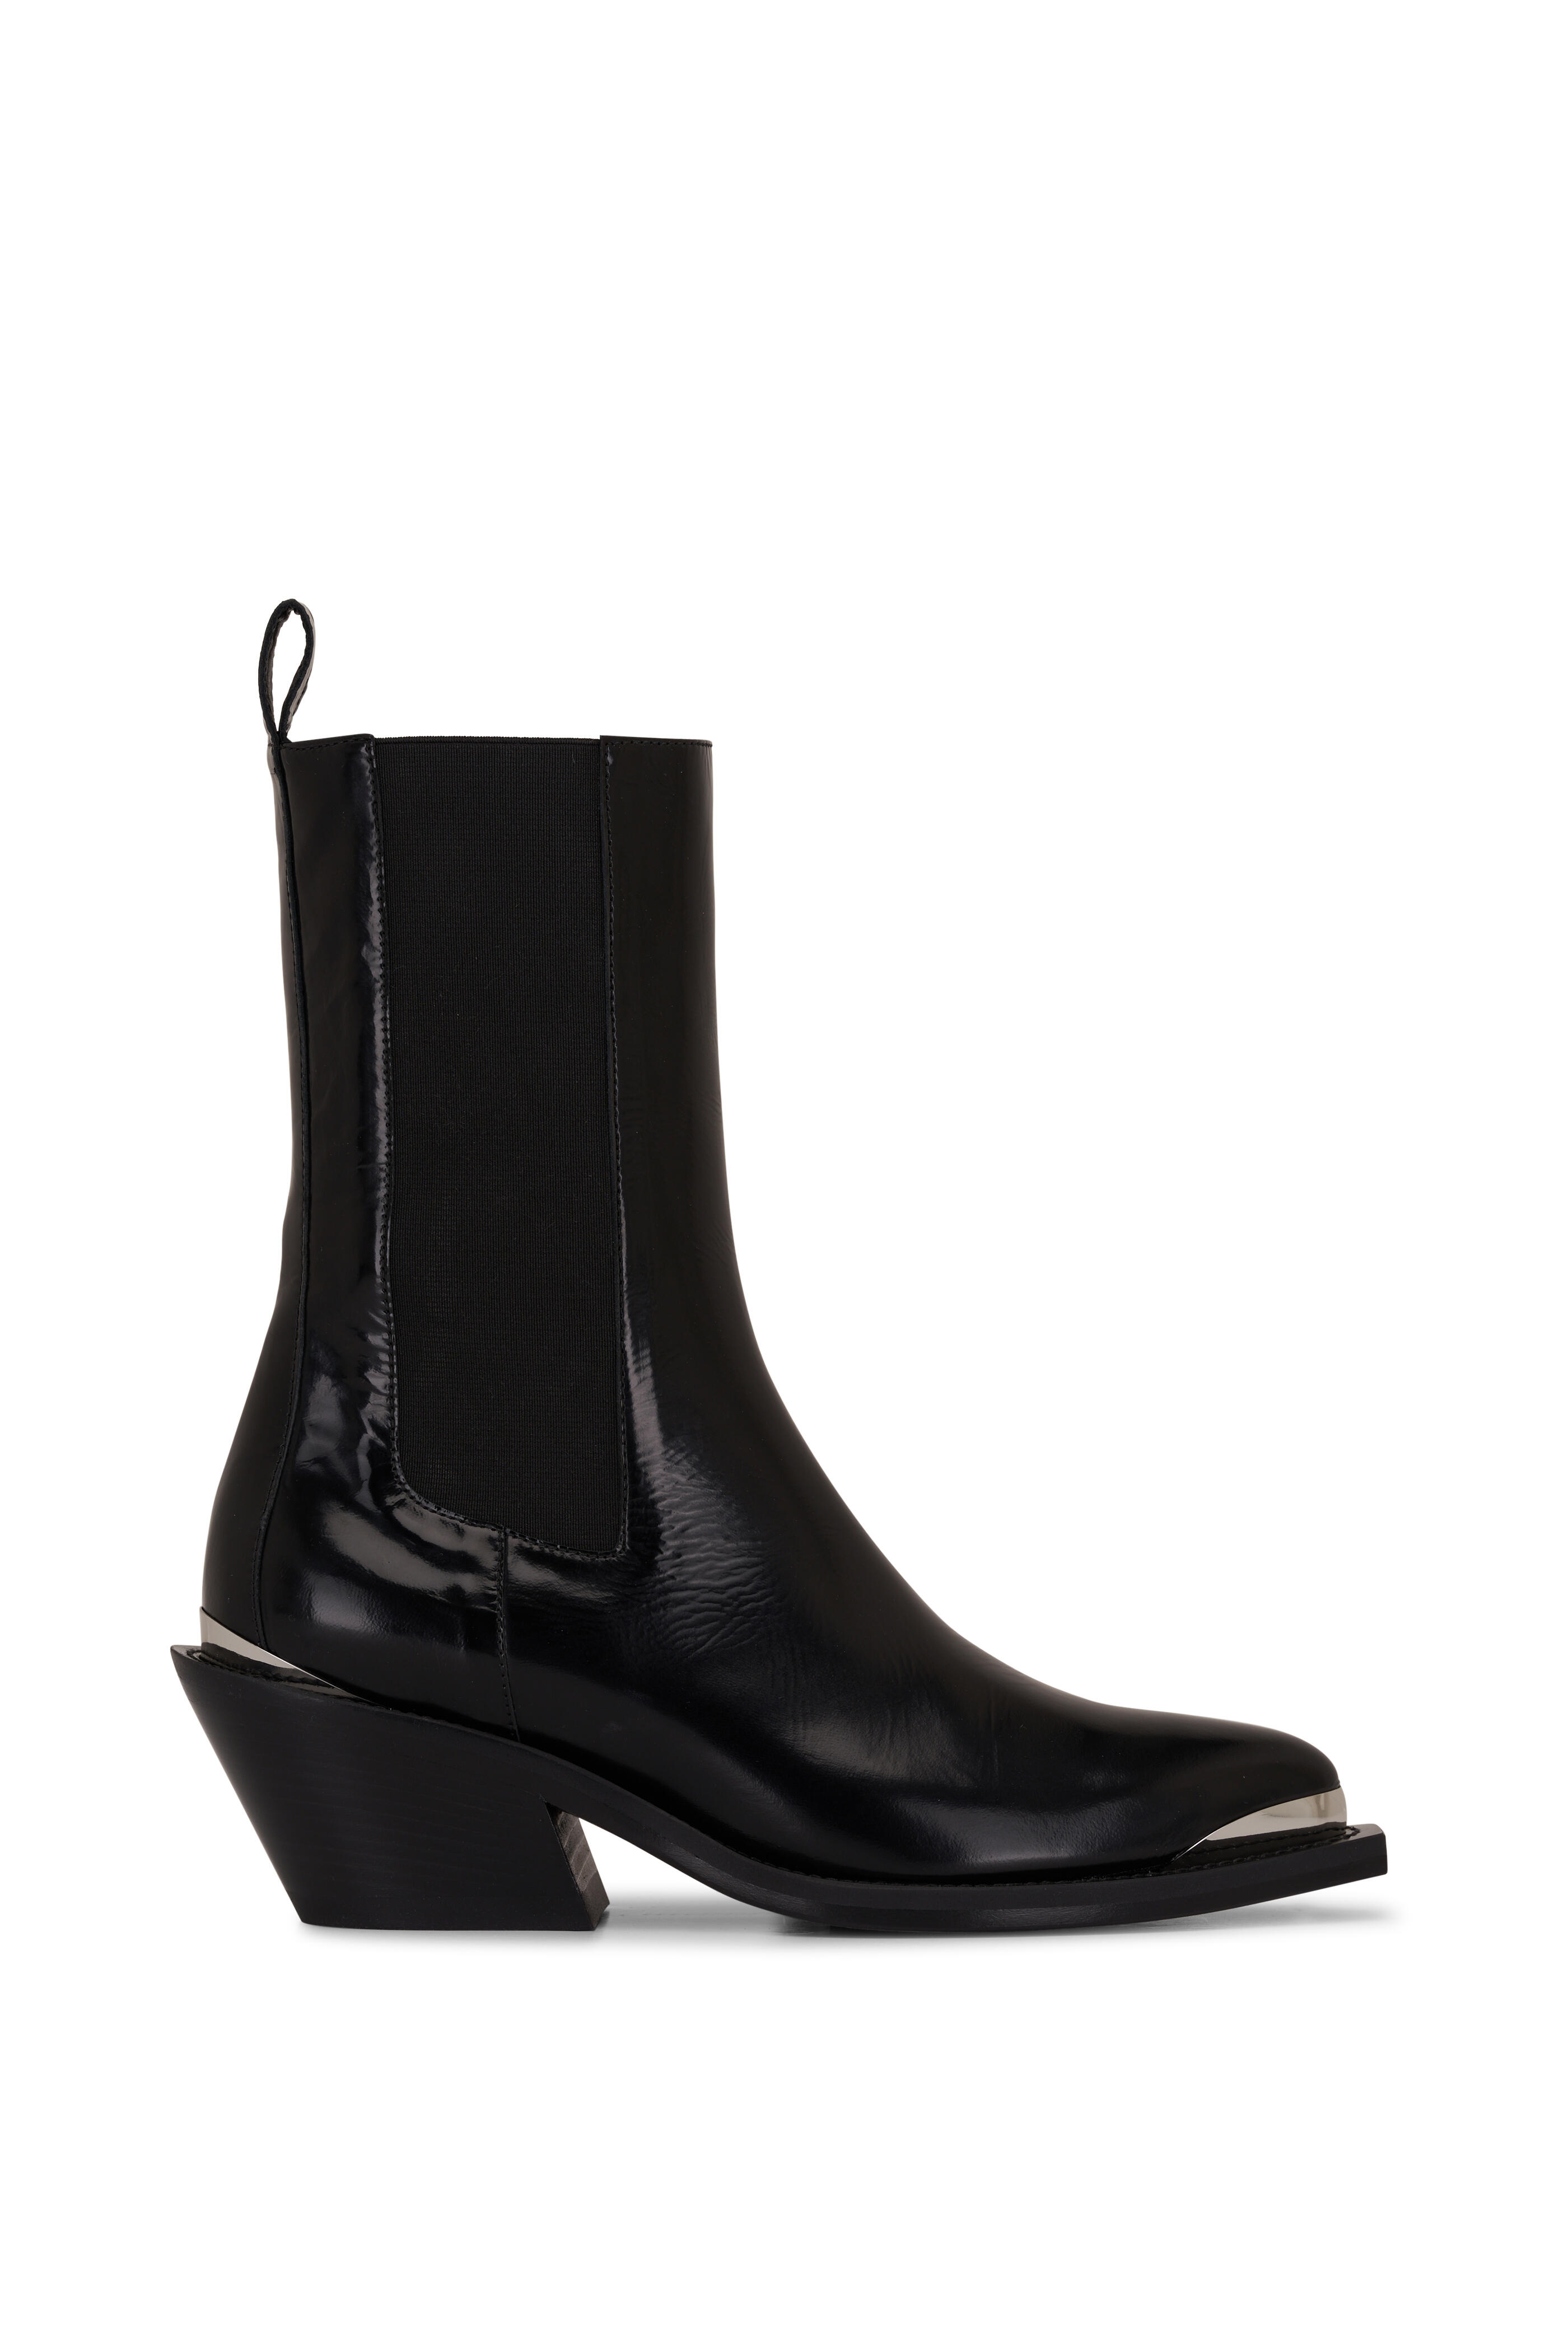 Dorothee Schumacher - Shiny Moments Black Western Chelsea Boot, 50mm